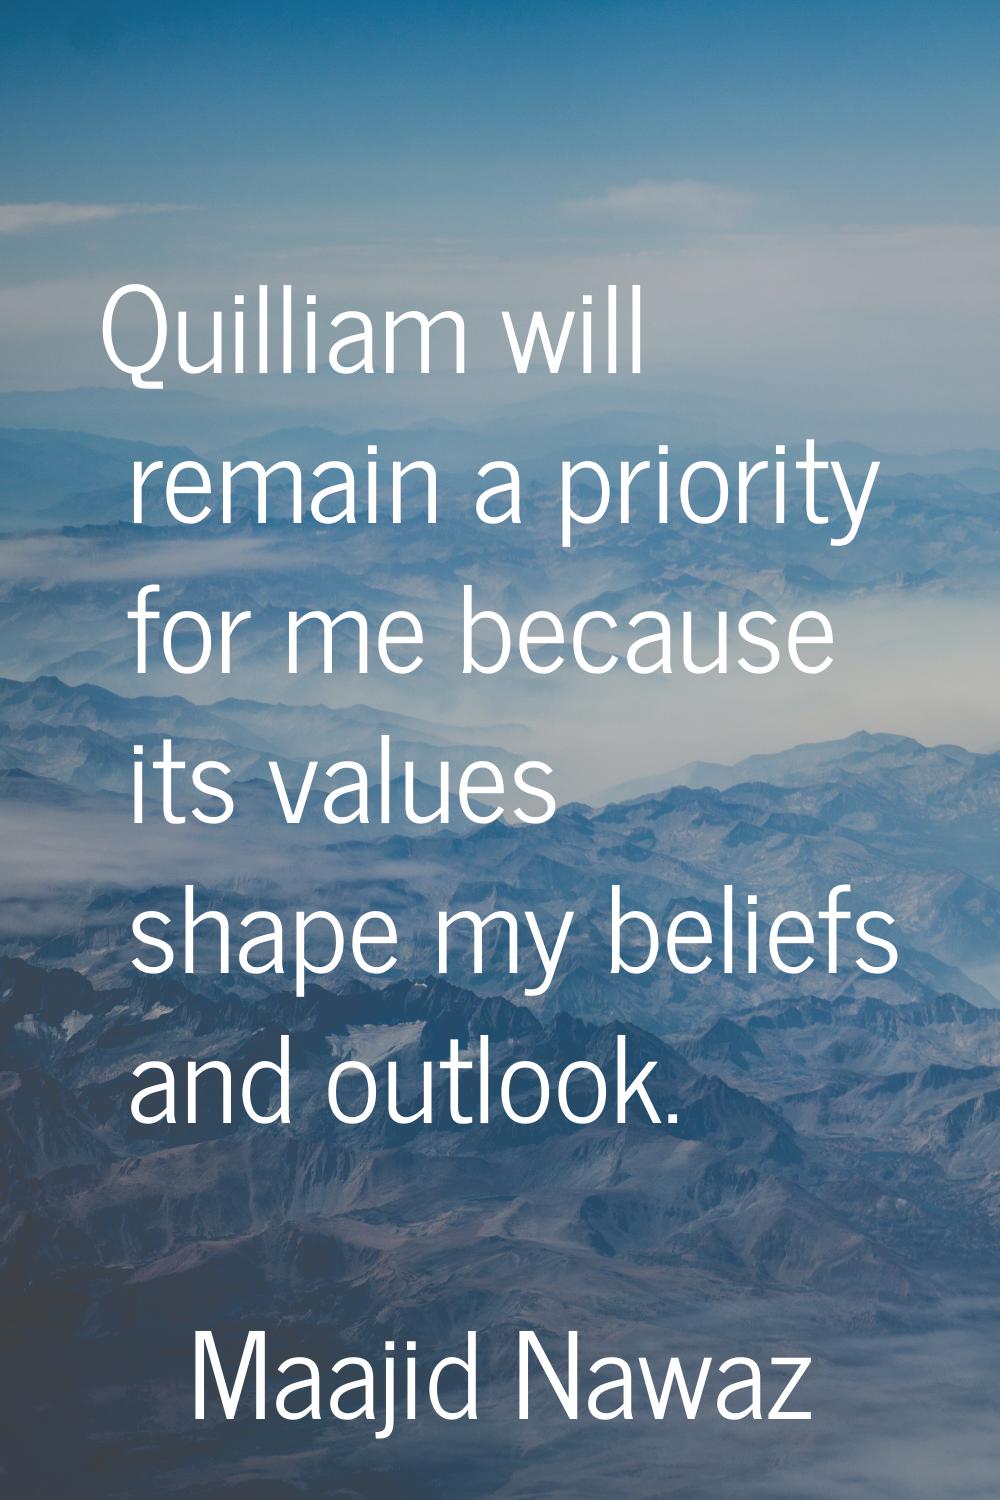 Quilliam will remain a priority for me because its values shape my beliefs and outlook.